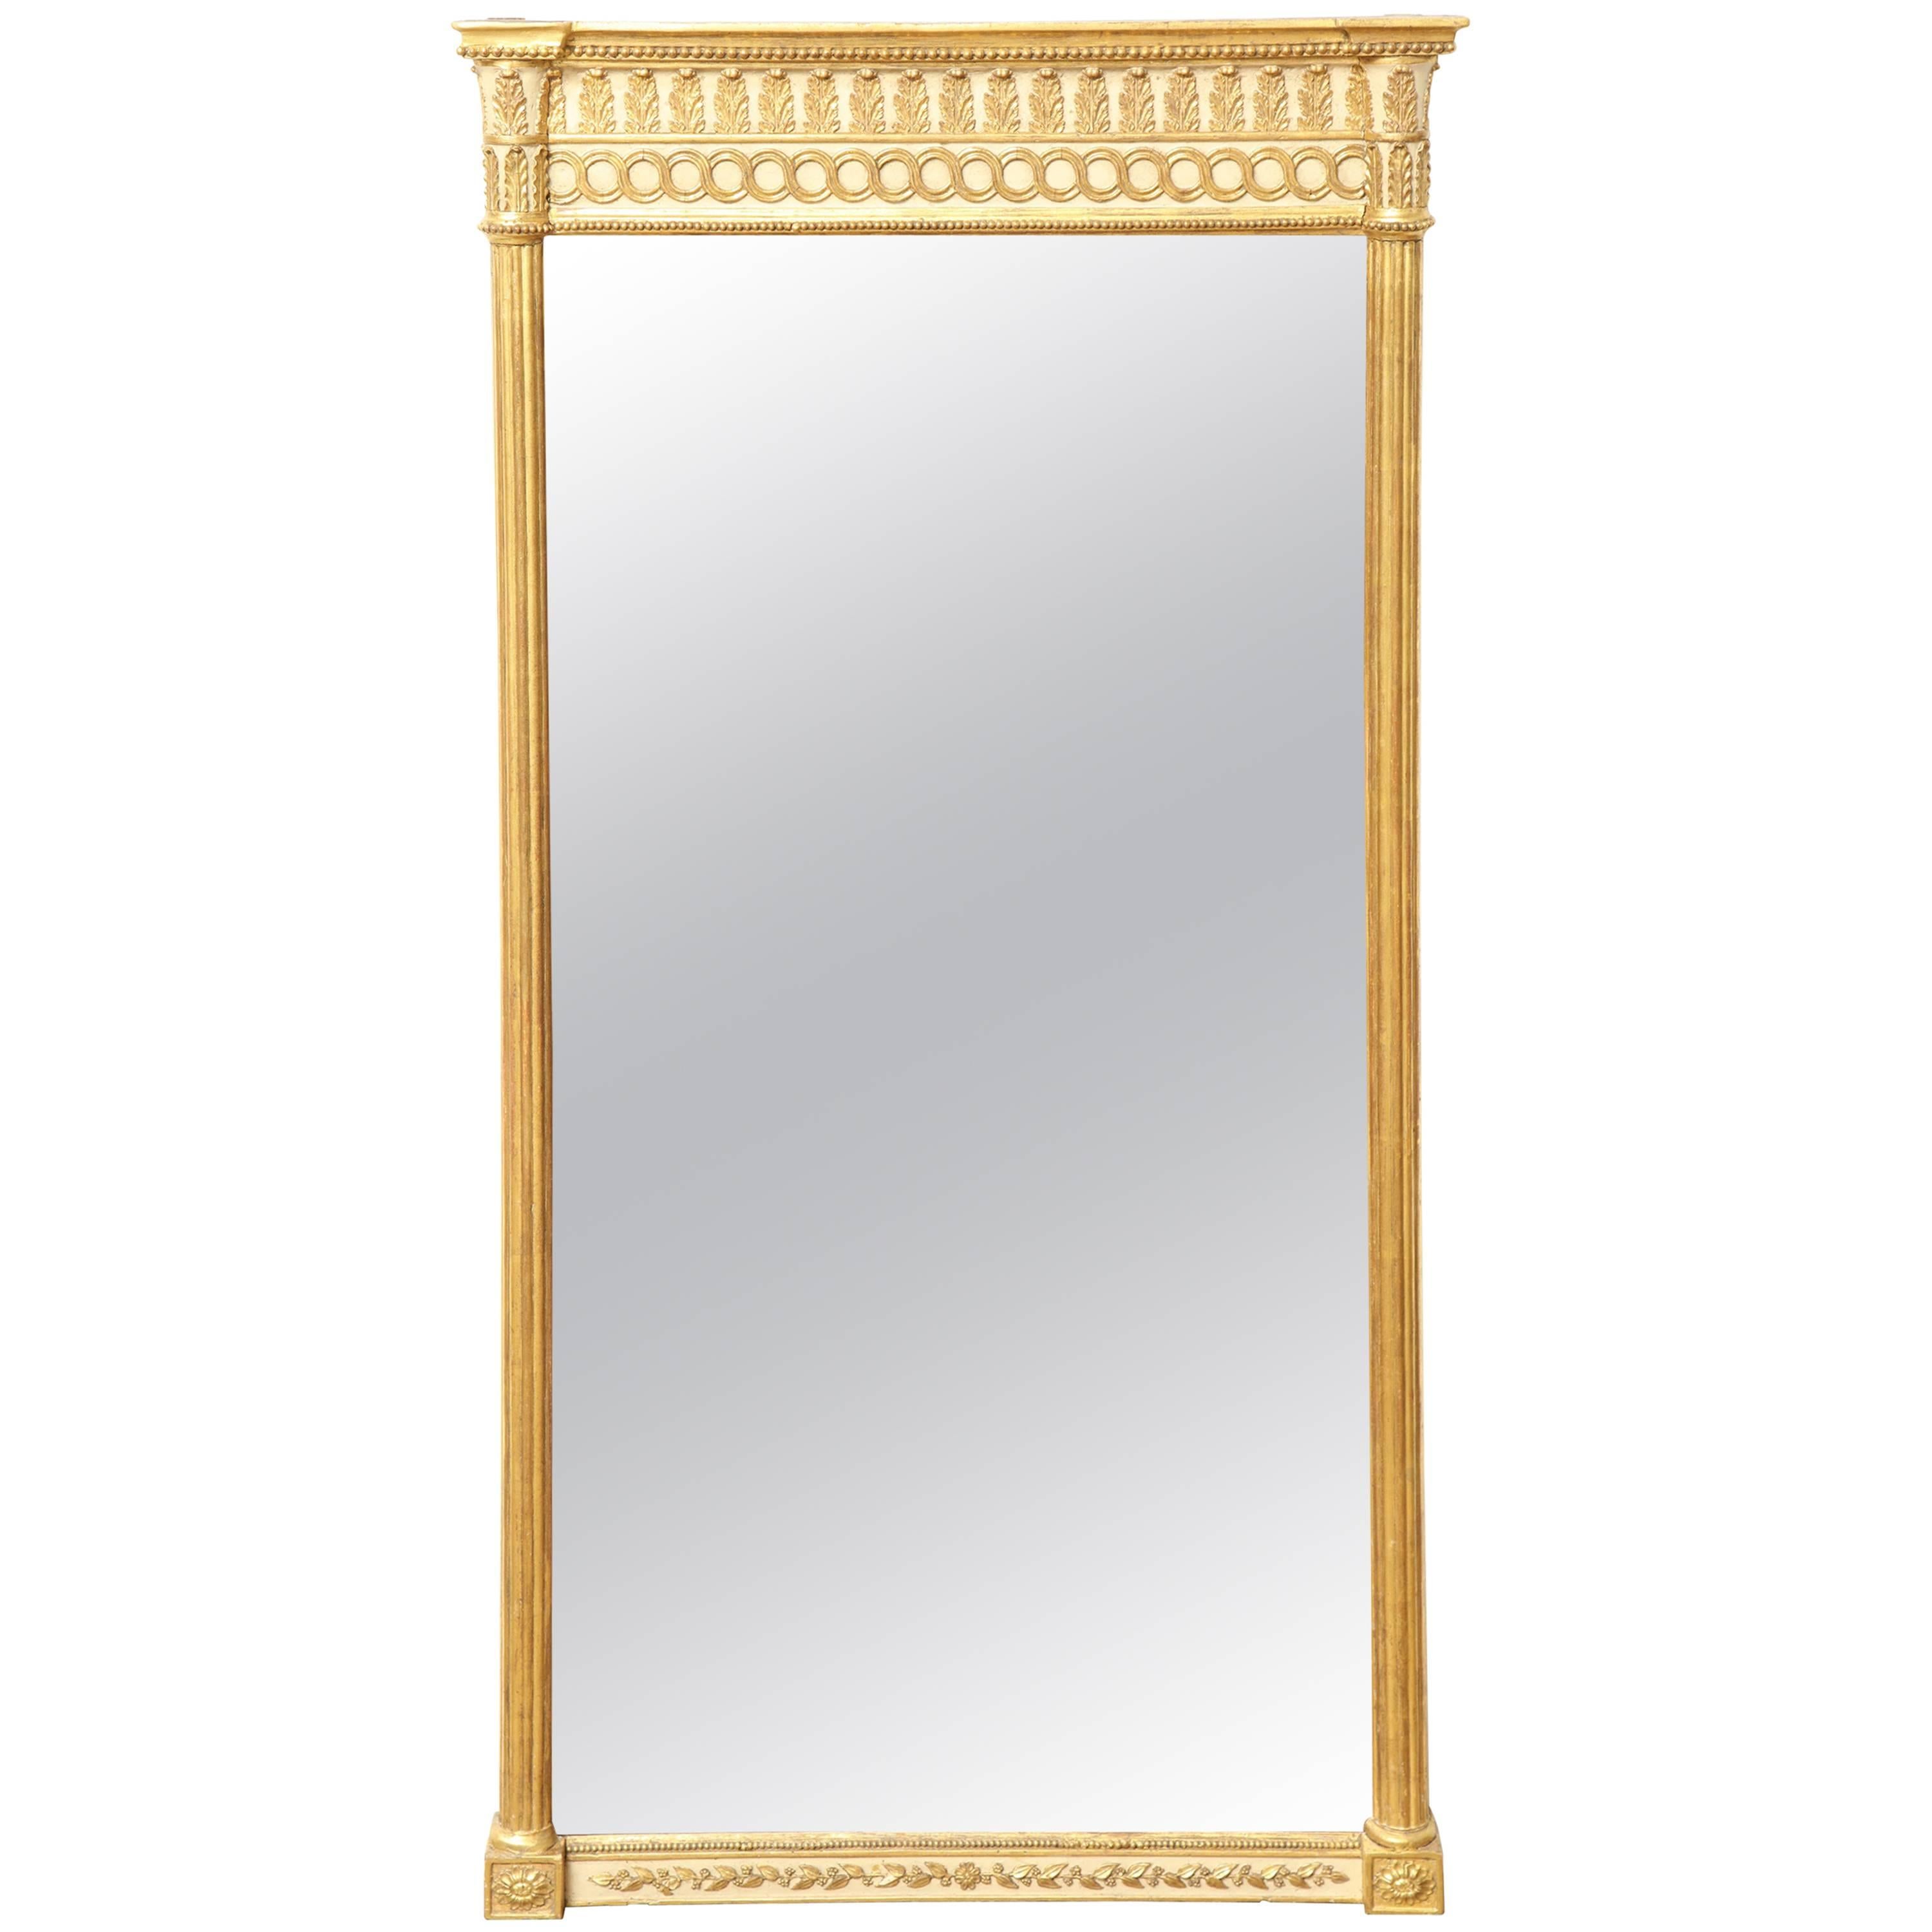 Early 19th Century English Regency, Gilded Neoclassical Mirror